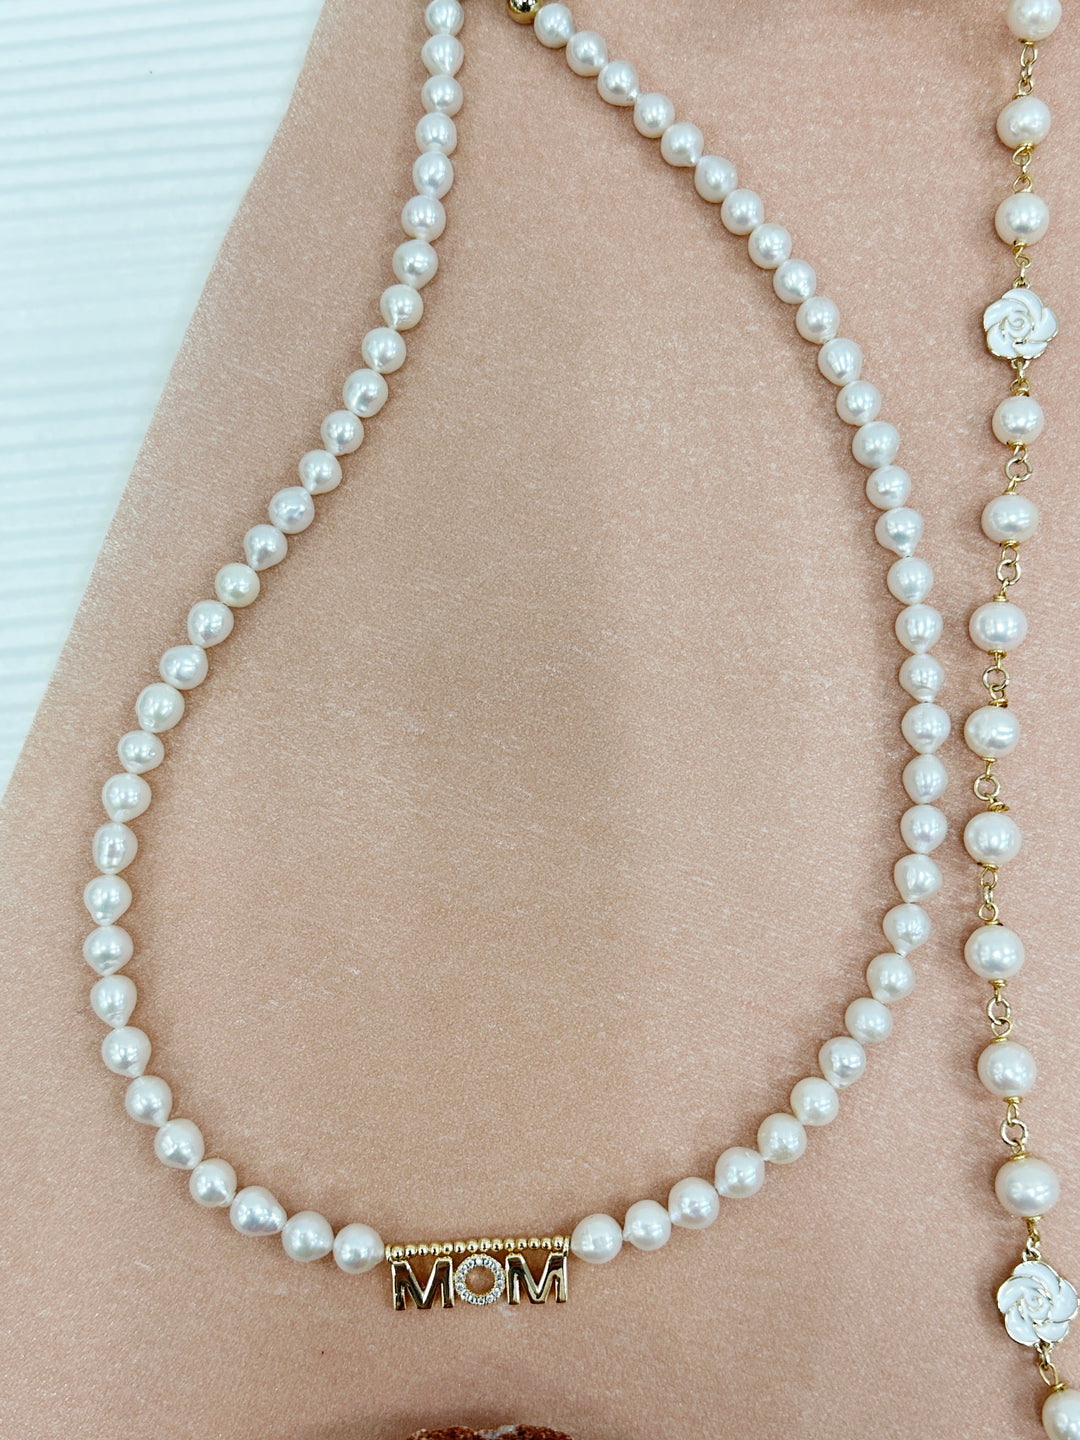 Freshwater Pearls with MOM Pendant Necklace LN060